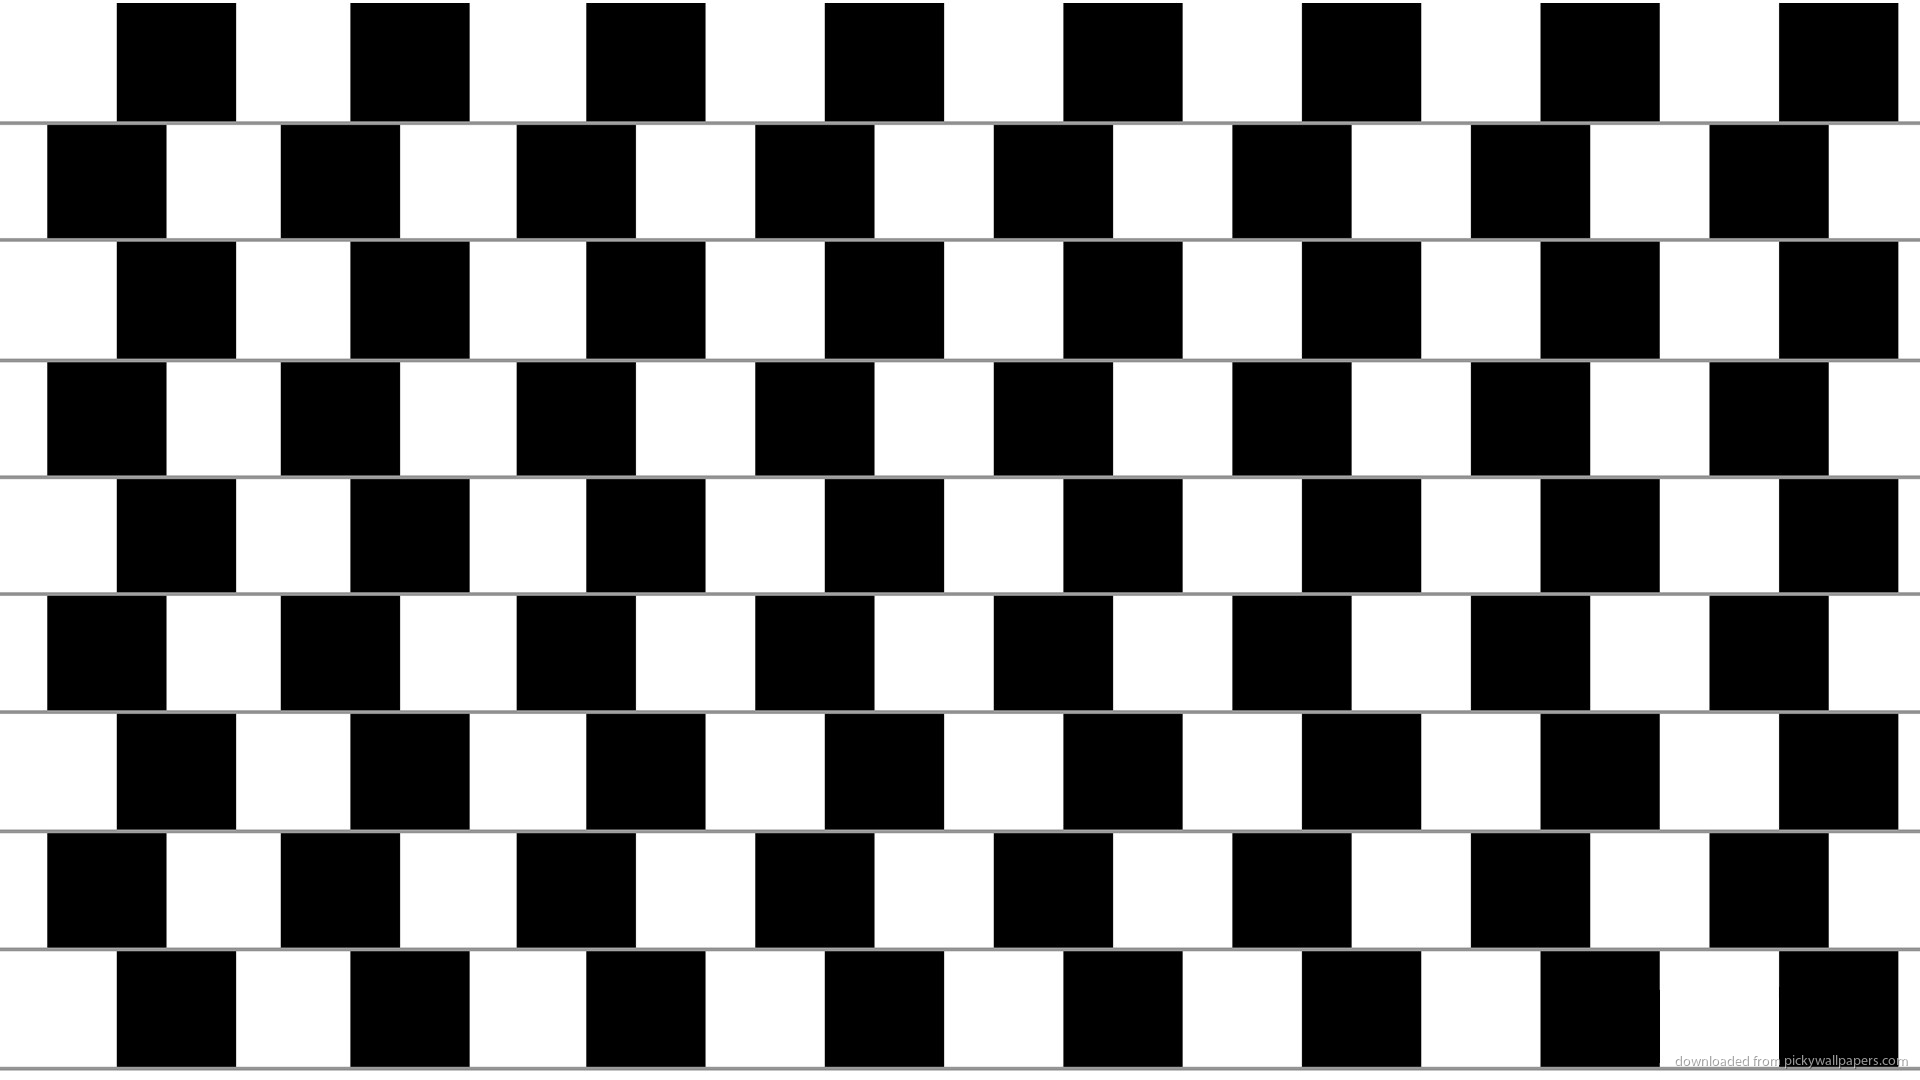 Are The Lines Straight Or Curved?